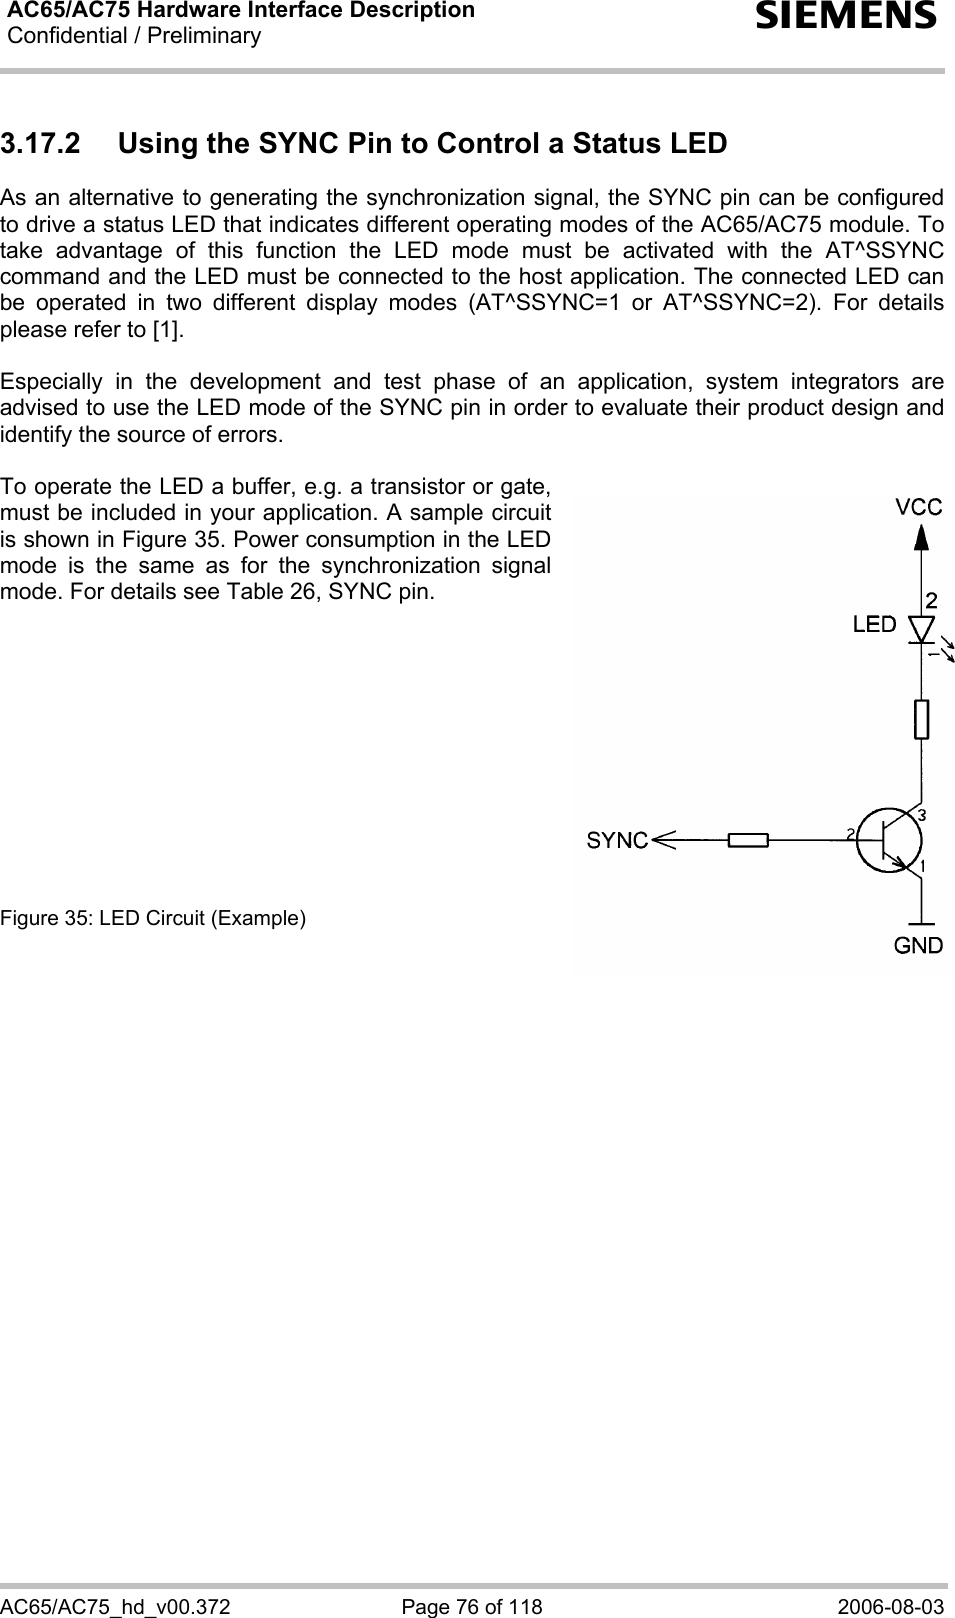 AC65/AC75 Hardware Interface Description Confidential / Preliminary   s AC65/AC75_hd_v00.372  Page 76 of 118  2006-08-03 3.17.2  Using the SYNC Pin to Control a Status LED  As an alternative to generating the synchronization signal, the SYNC pin can be configured to drive a status LED that indicates different operating modes of the AC65/AC75 module. To take advantage of this function the LED mode must be activated with the AT^SSYNC command and the LED must be connected to the host application. The connected LED can be operated in two different display modes (AT^SSYNC=1 or AT^SSYNC=2). For details please refer to [1].  Especially in the development and test phase of an application, system integrators are advised to use the LED mode of the SYNC pin in order to evaluate their product design and identify the source of errors.  To operate the LED a buffer, e.g. a transistor or gate, must be included in your application. A sample circuit is shown in Figure 35. Power consumption in the LED mode is the same as for the synchronization signal mode. For details see Table 26, SYNC pin.            Figure 35: LED Circuit (Example)   